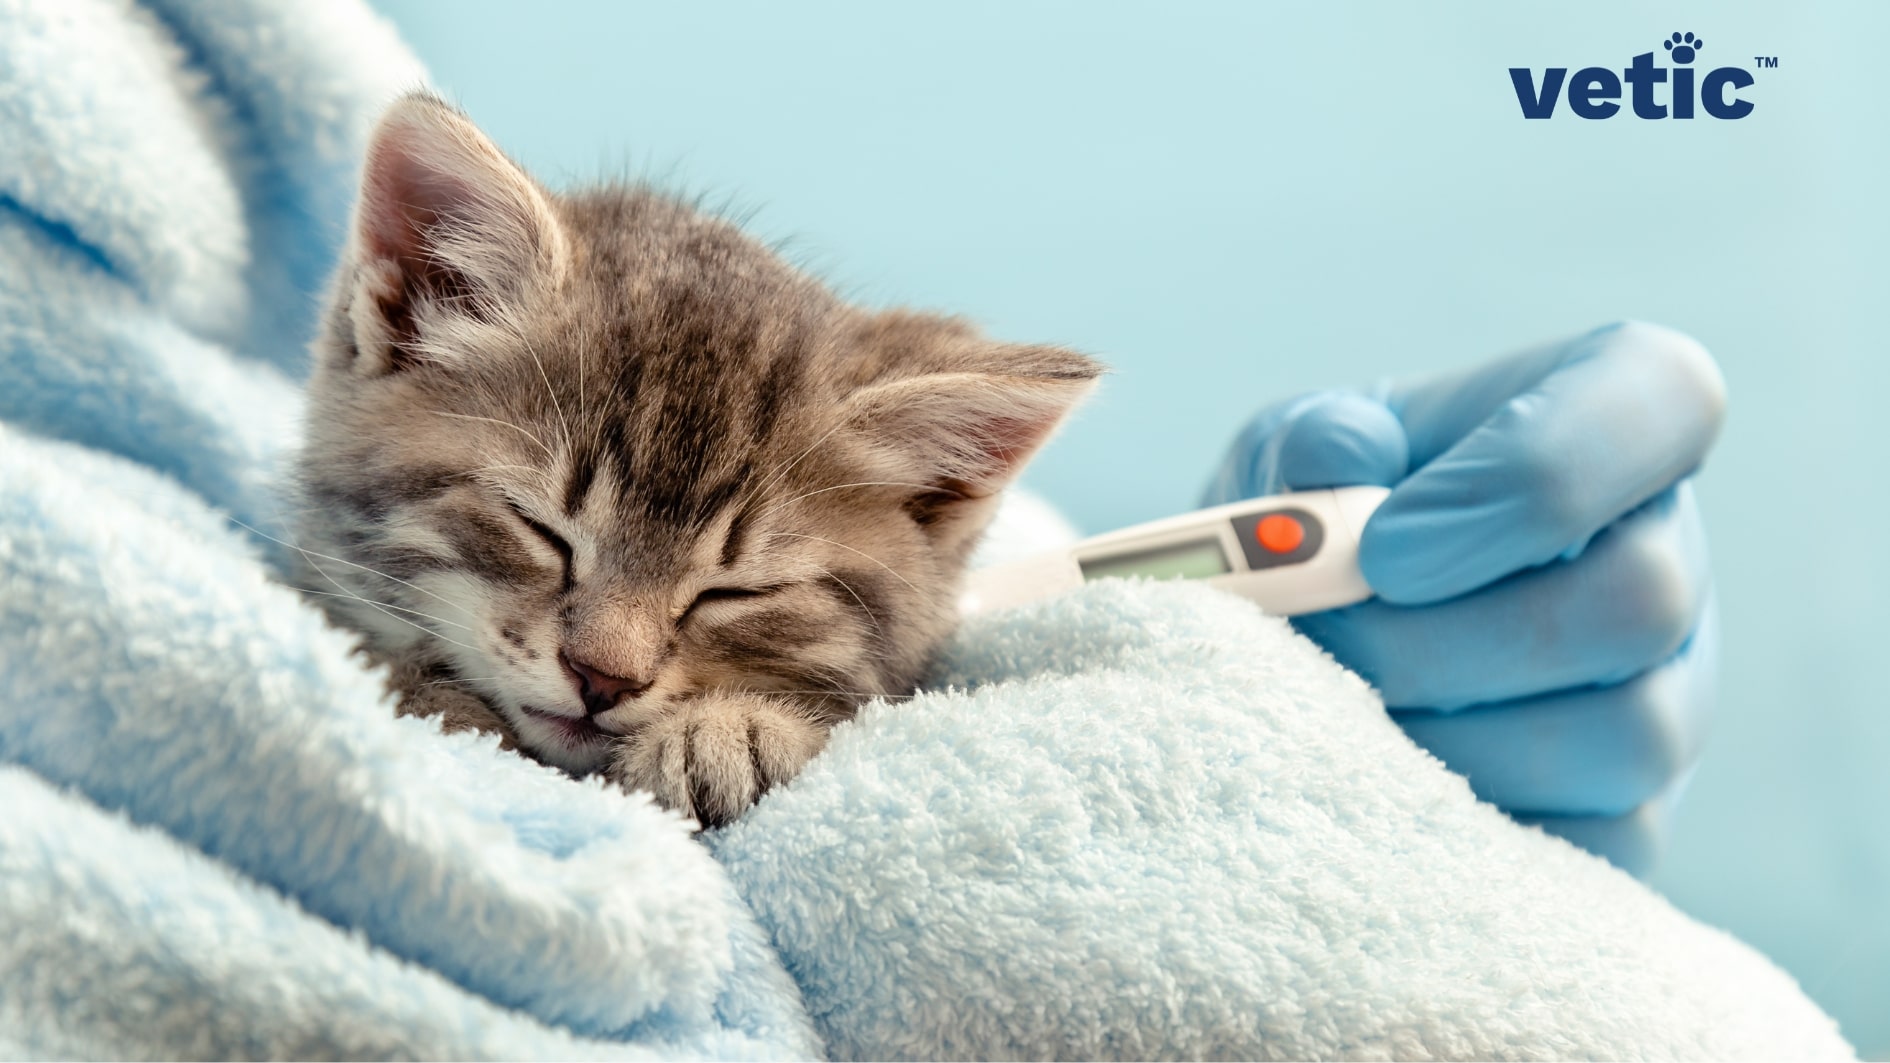 Mackerel kitten wrapped in a baby blue blanket. Gloved hand taking the temperature. Cat vaccines can protect your kitten from viral diseases that presents as high fever